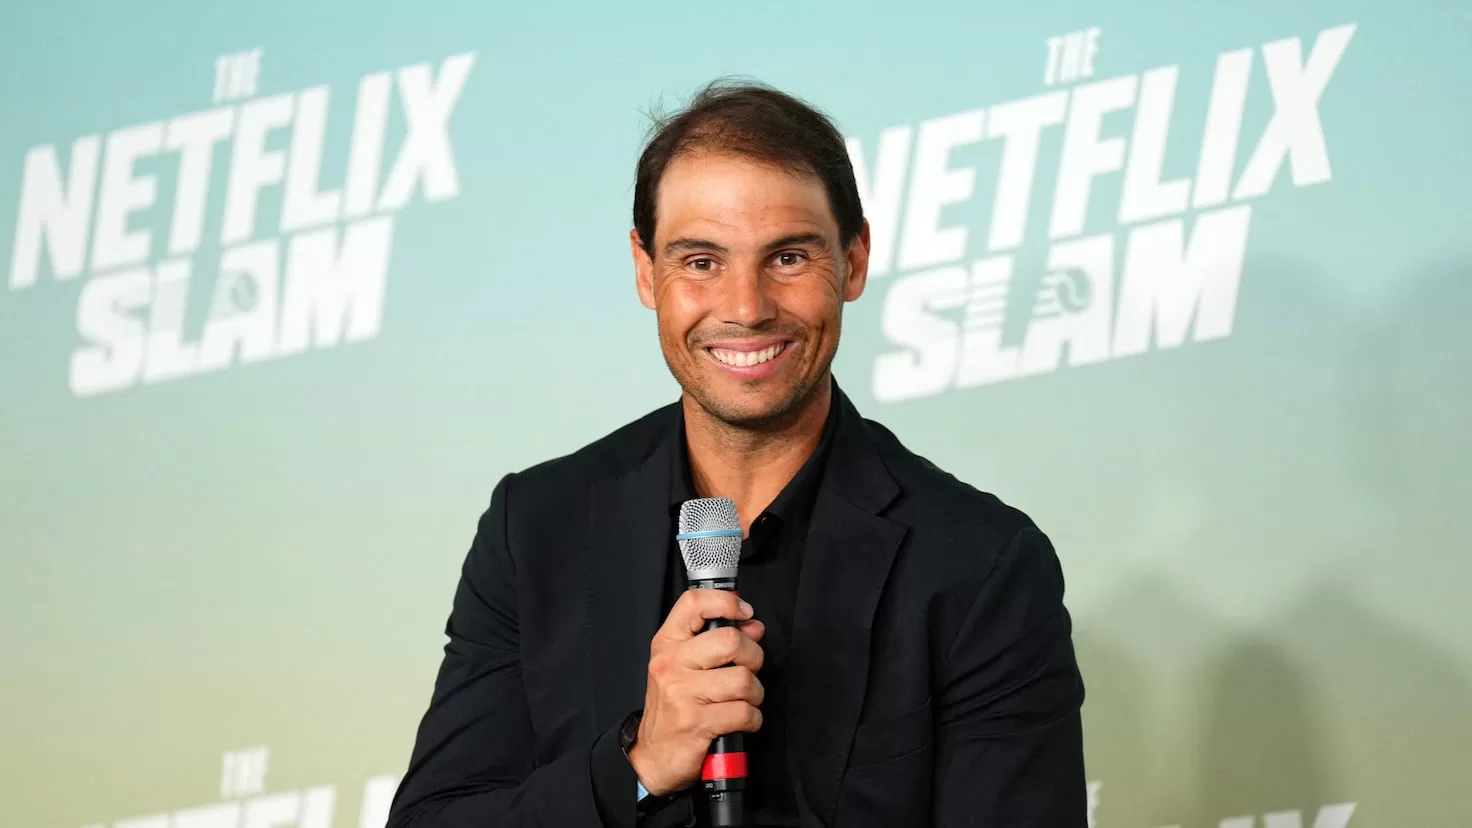 Nadal buys an apartment in the center of Madrid for 4 million euros
